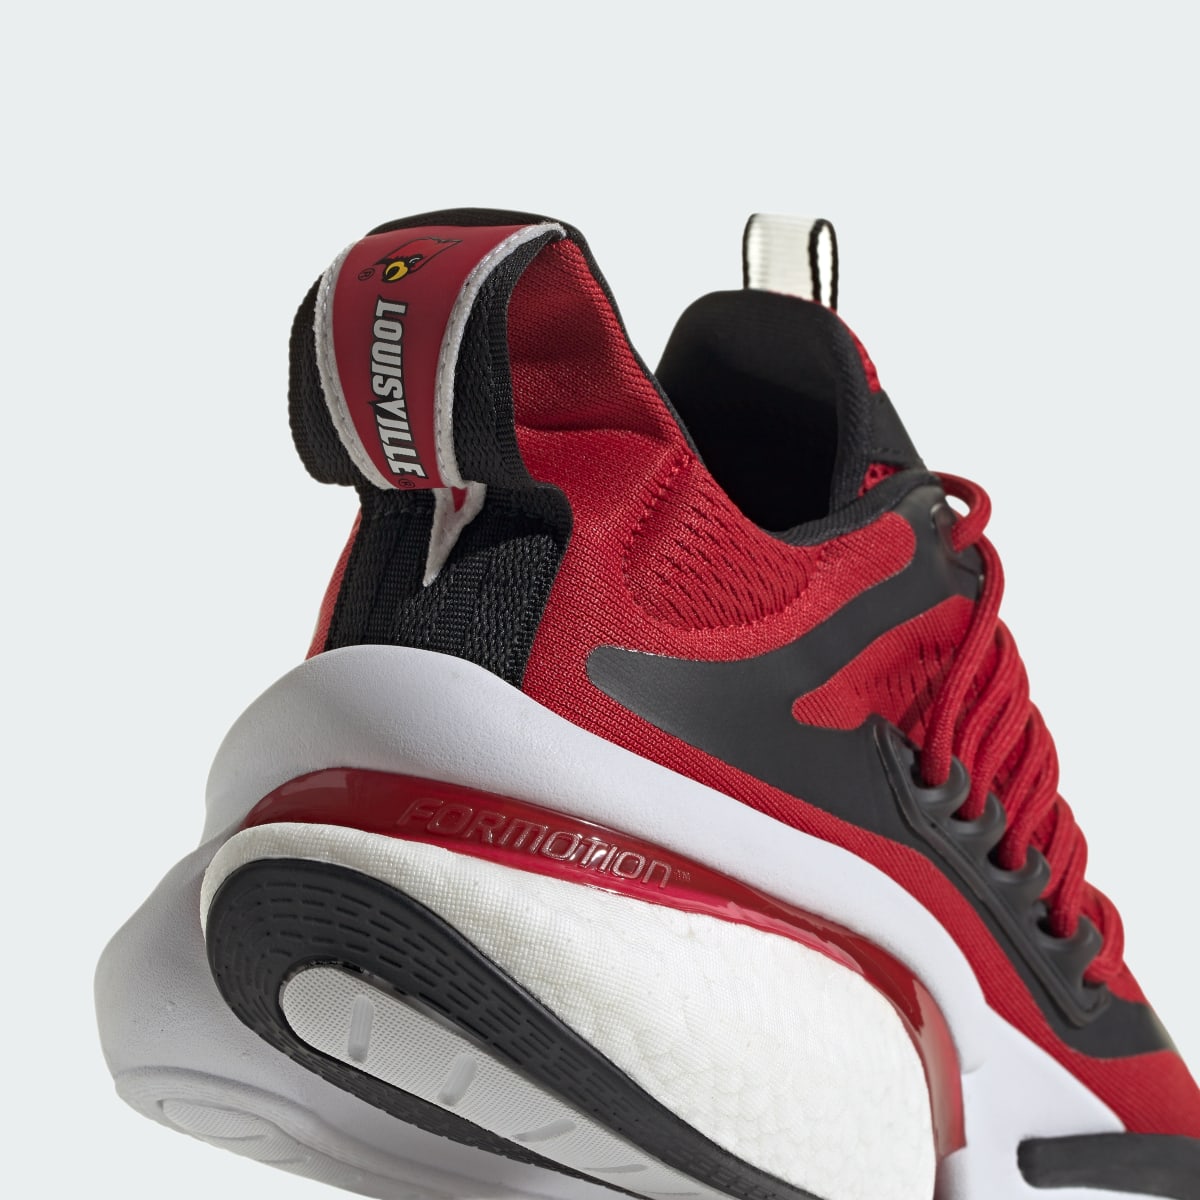 Adidas Louisville Alphaboost V1 Shoes. 9